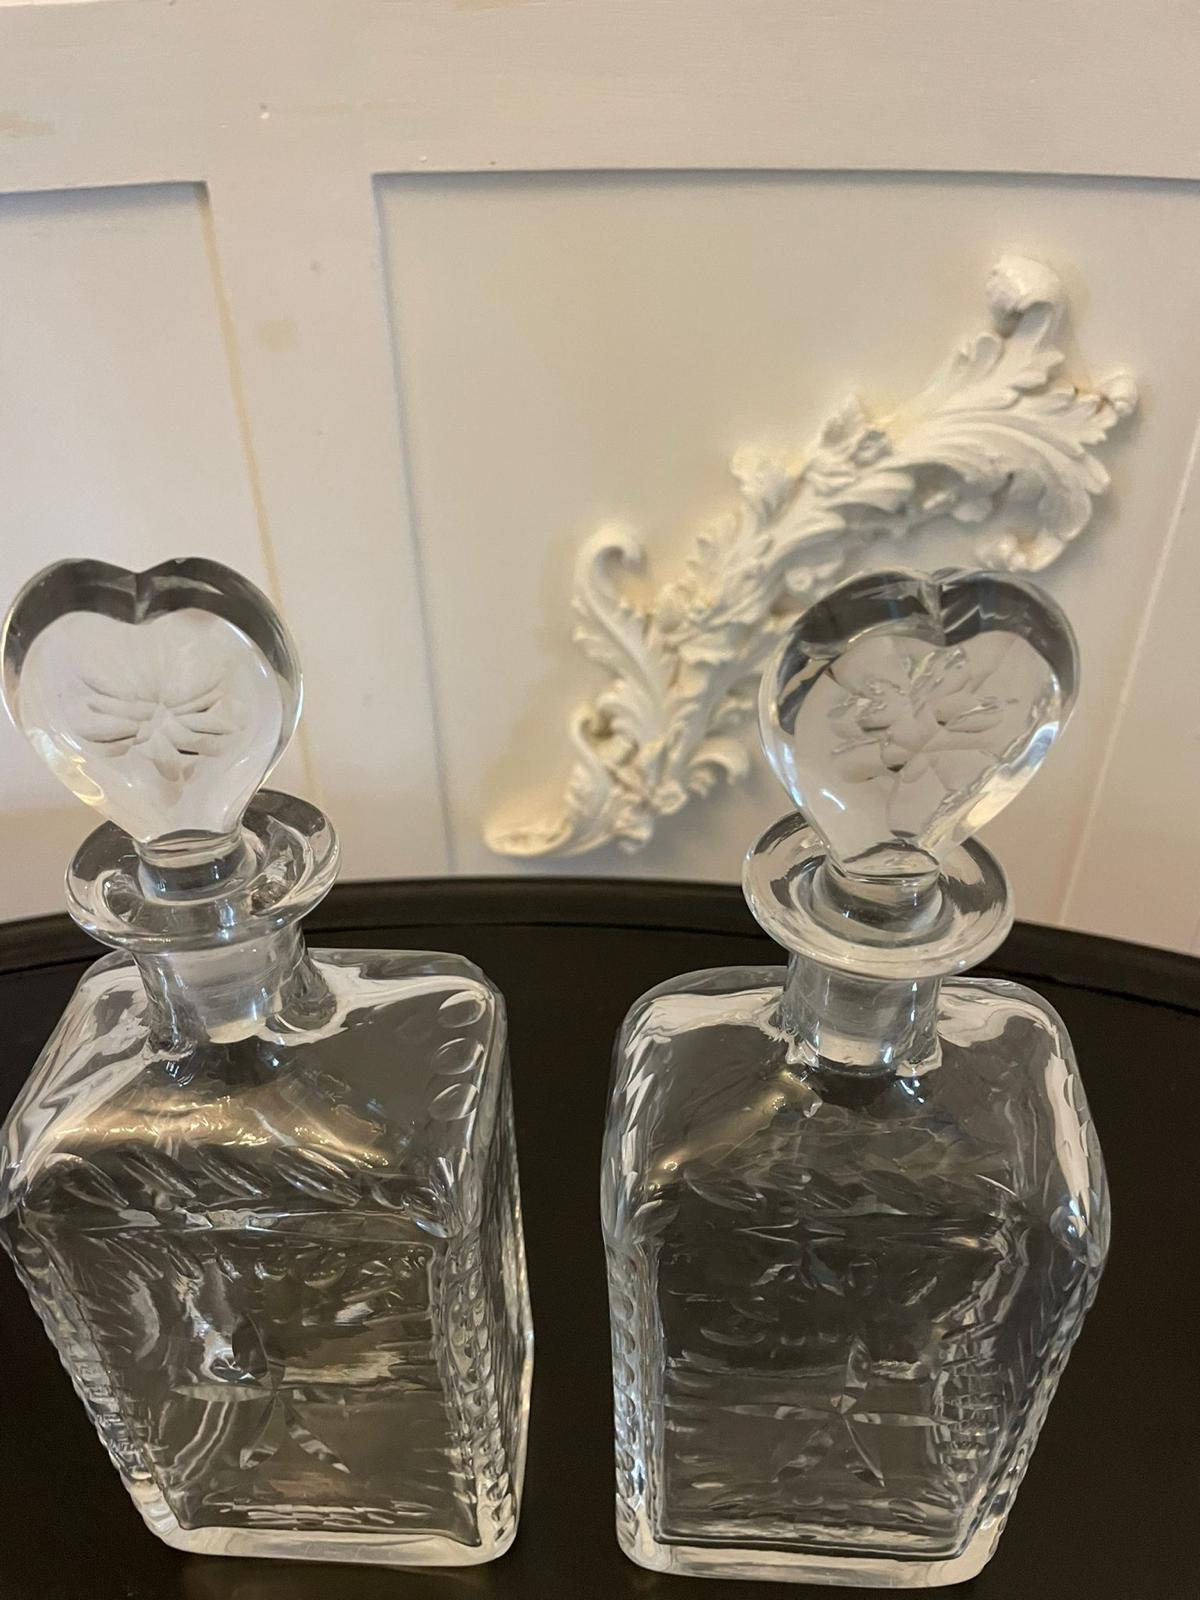 Unusual Pair of Antique Victorian Quality Cut Glass Decanters  In Good Condition For Sale In Suffolk, GB